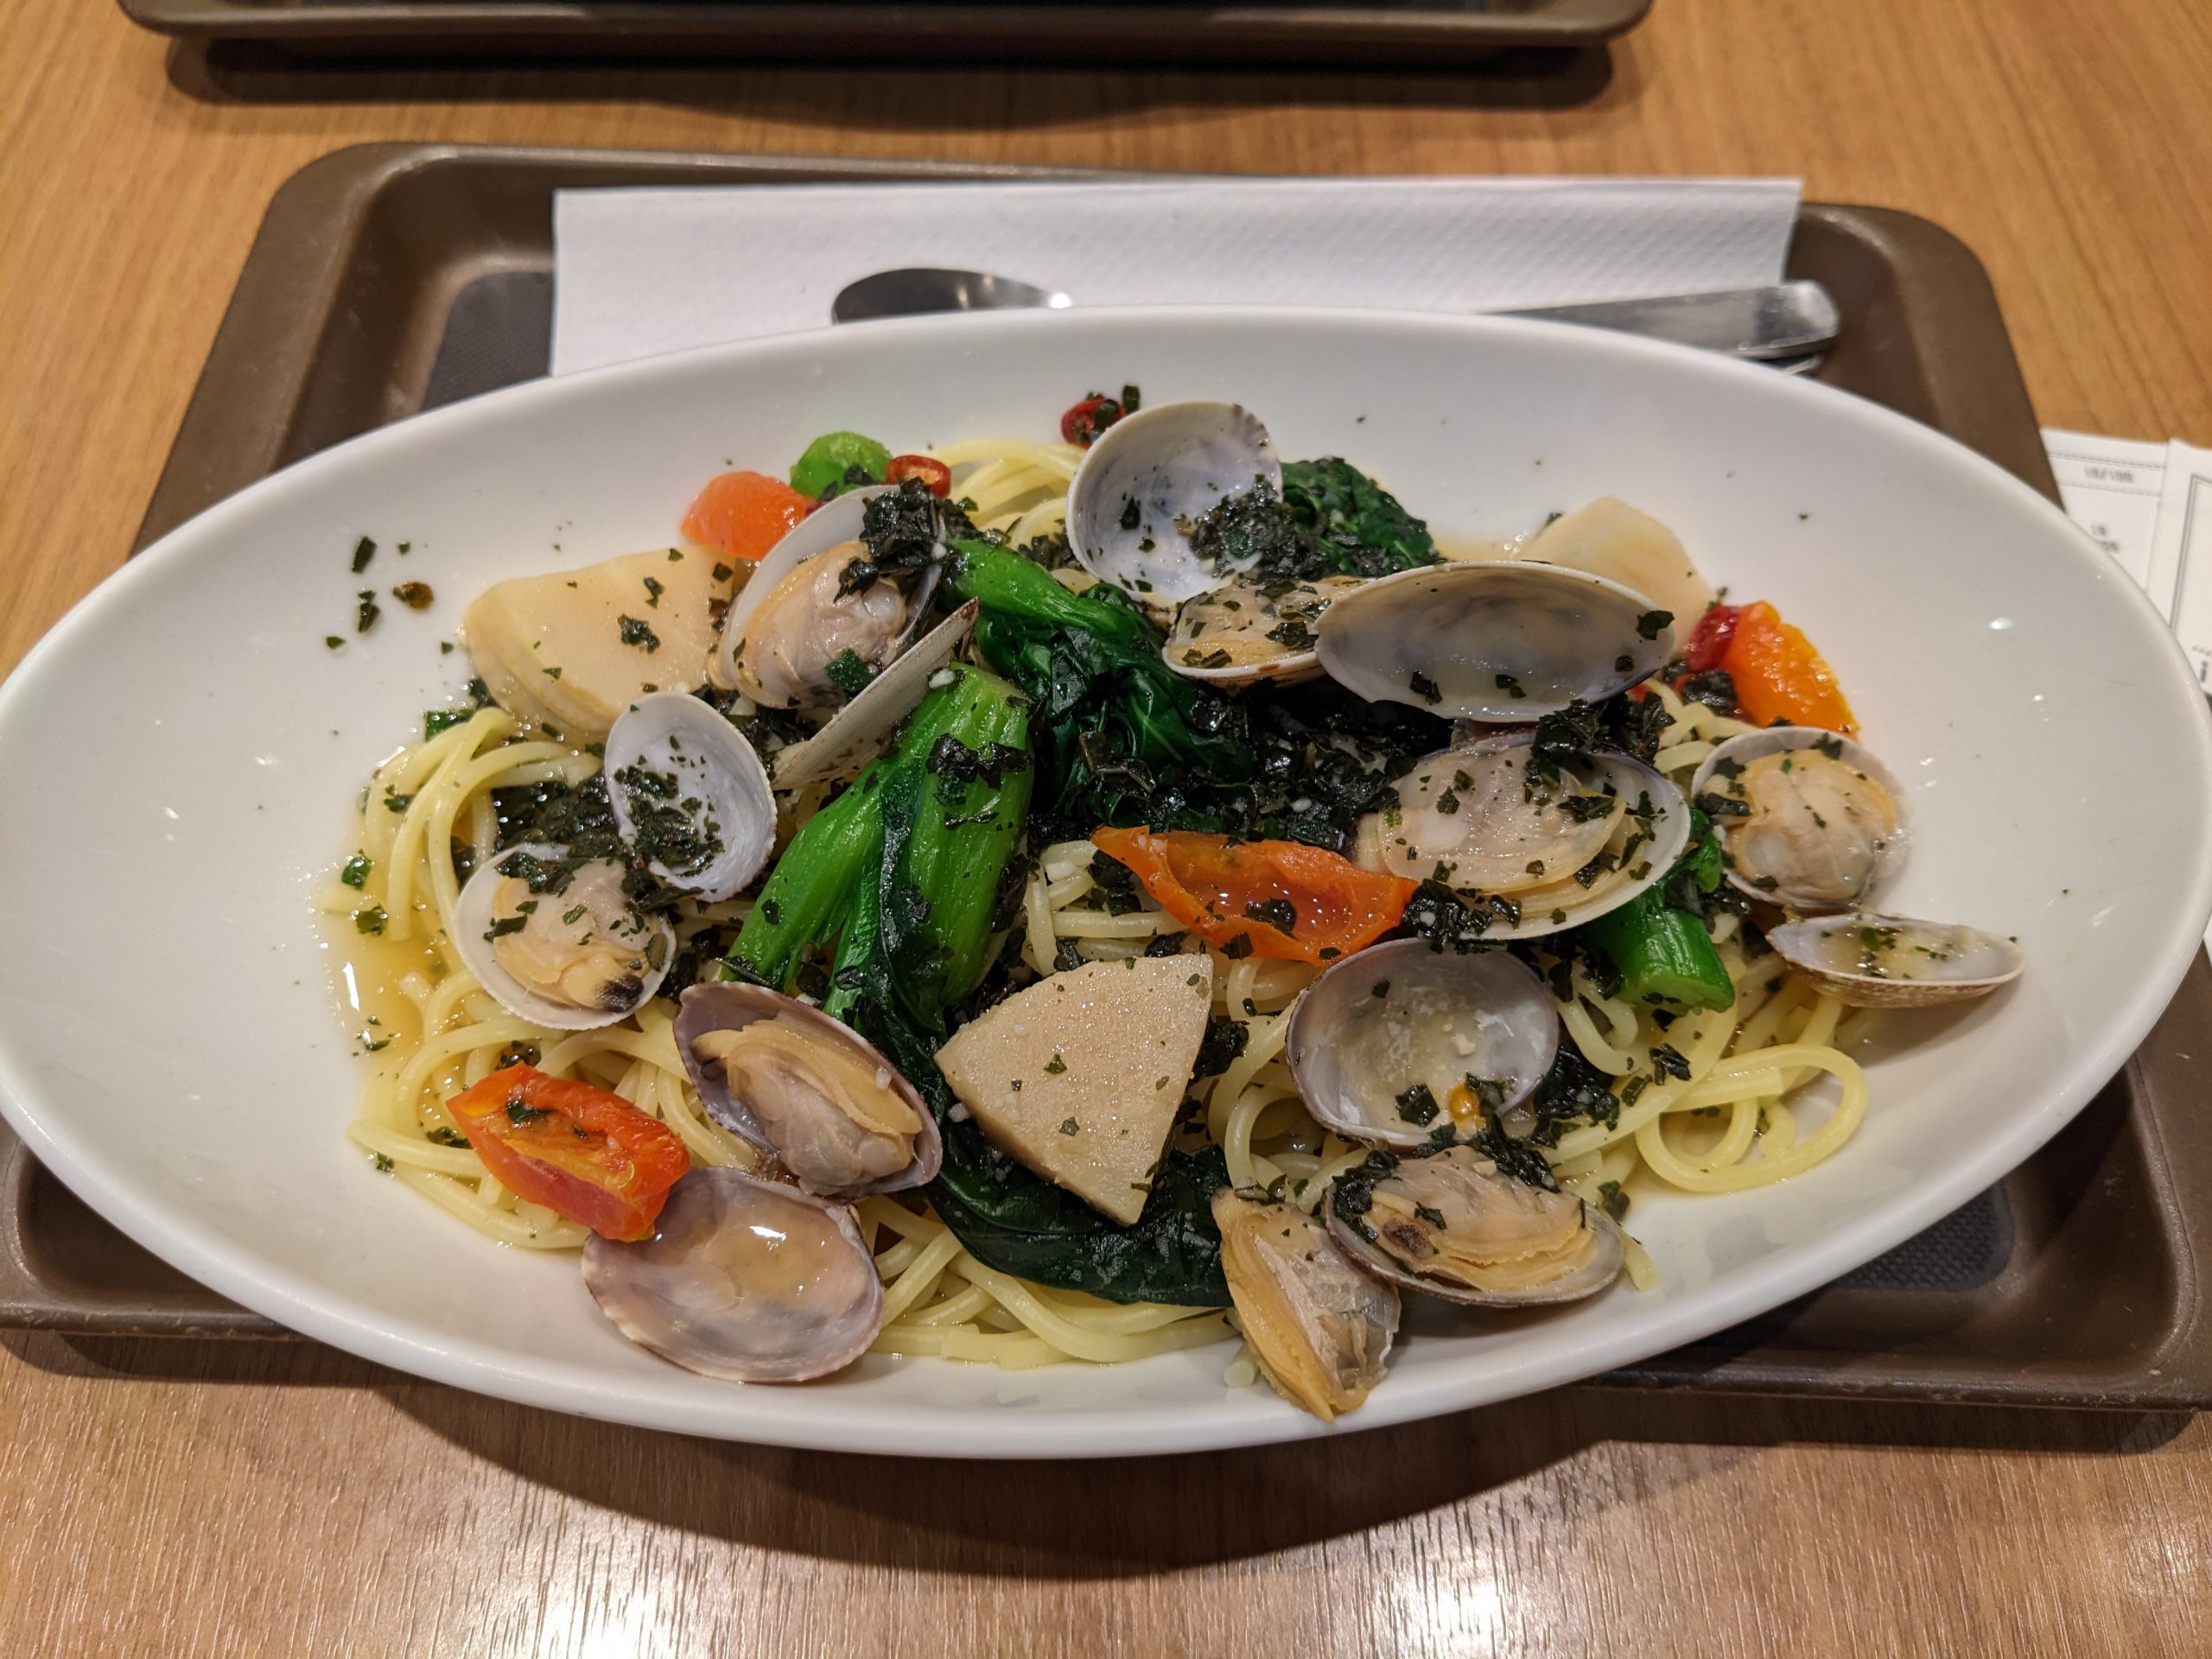 A plate of pasta with vegetables and clams in a white bowl